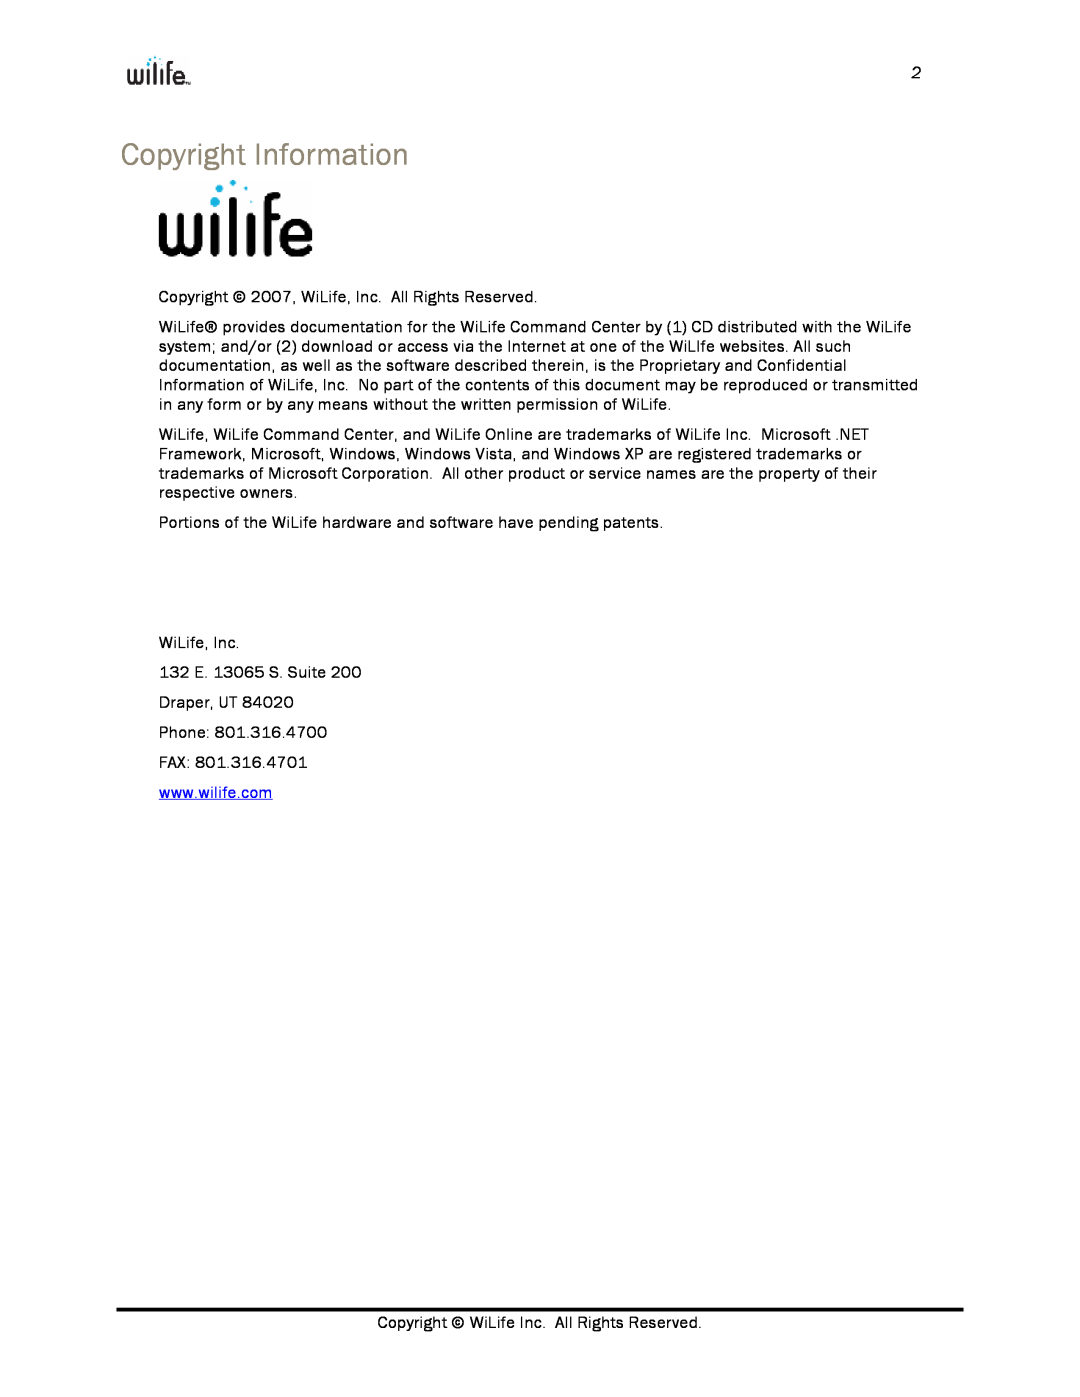 WiLife Video Security System manual Copyright Information 